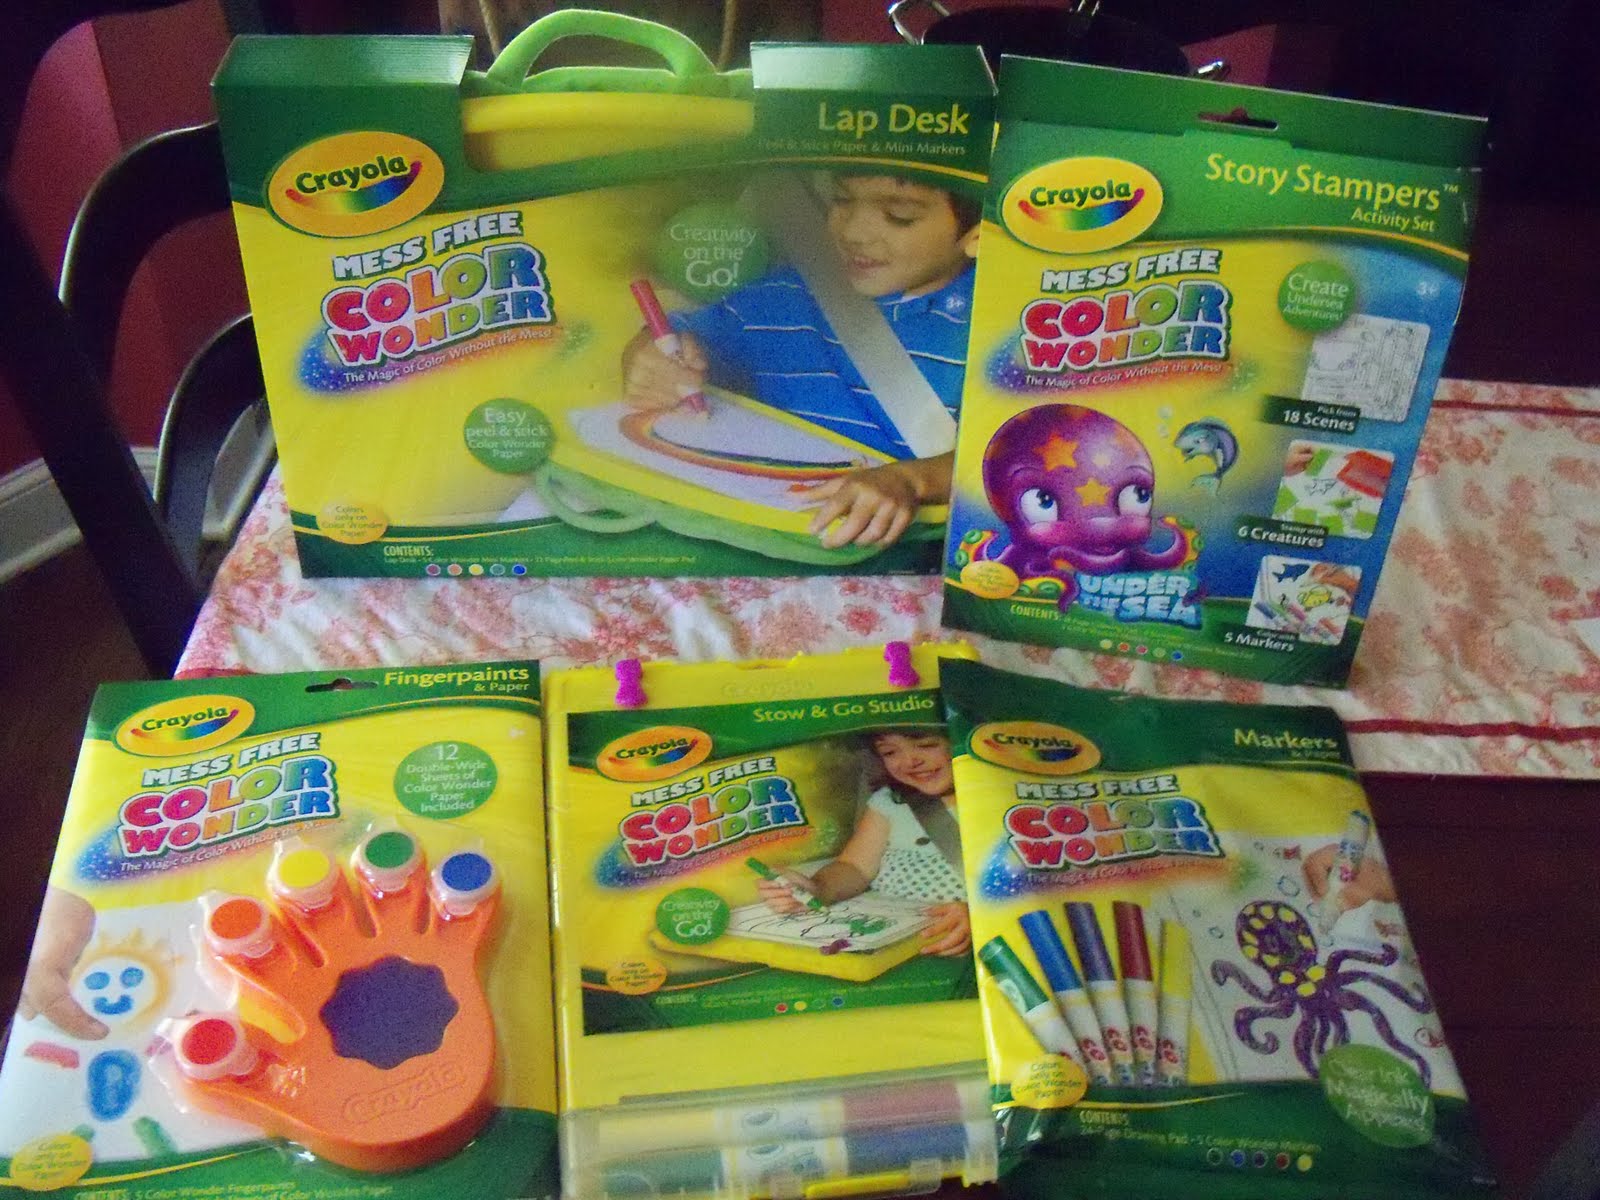 Review Of Crayola Color Wonder Fun Things To Do With Kids